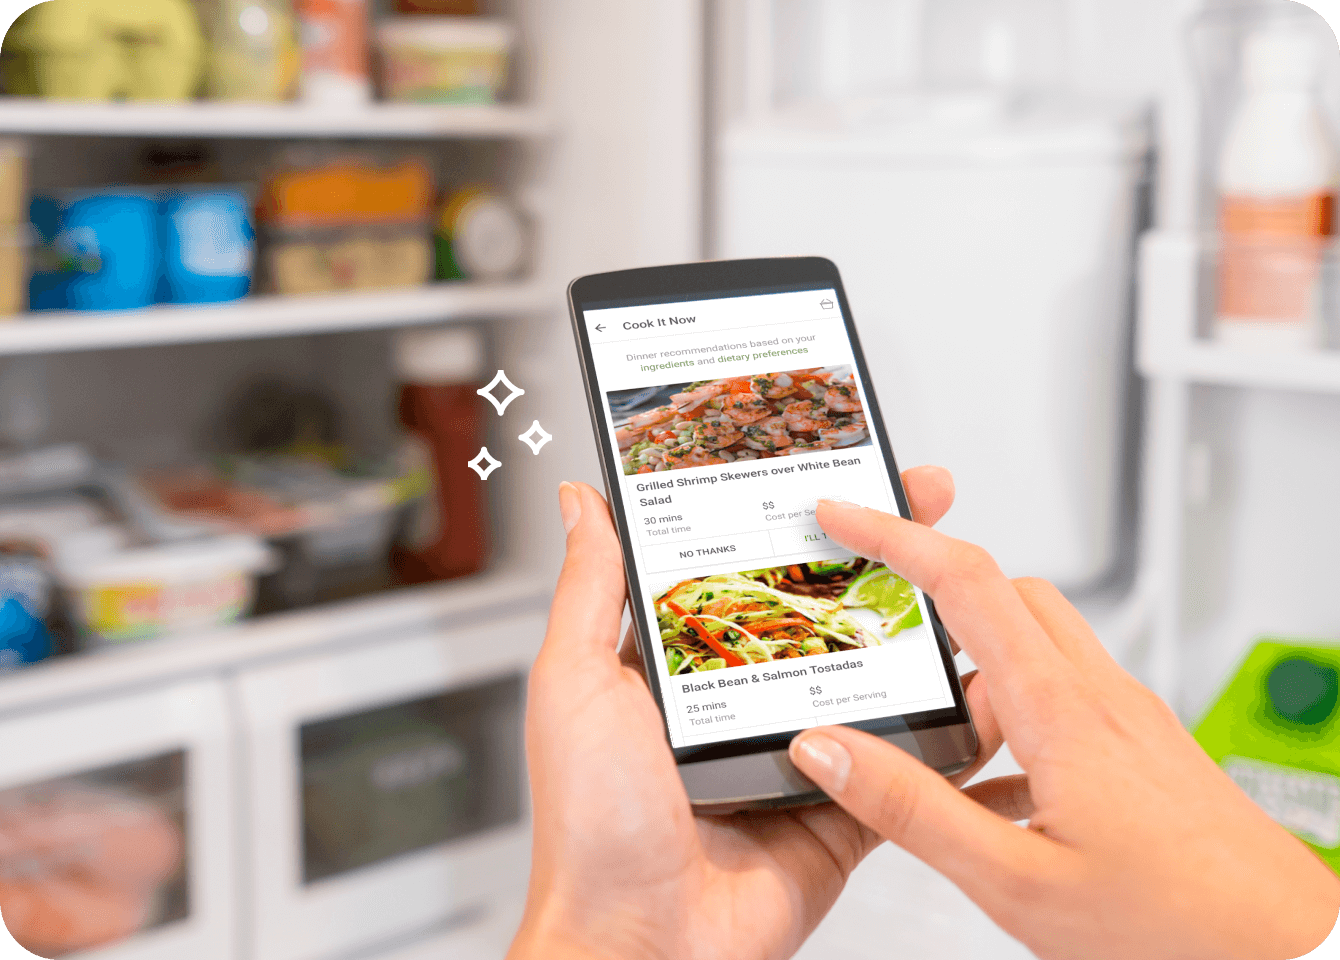 A smartphone with the Foodsmart app showing meal delivery features